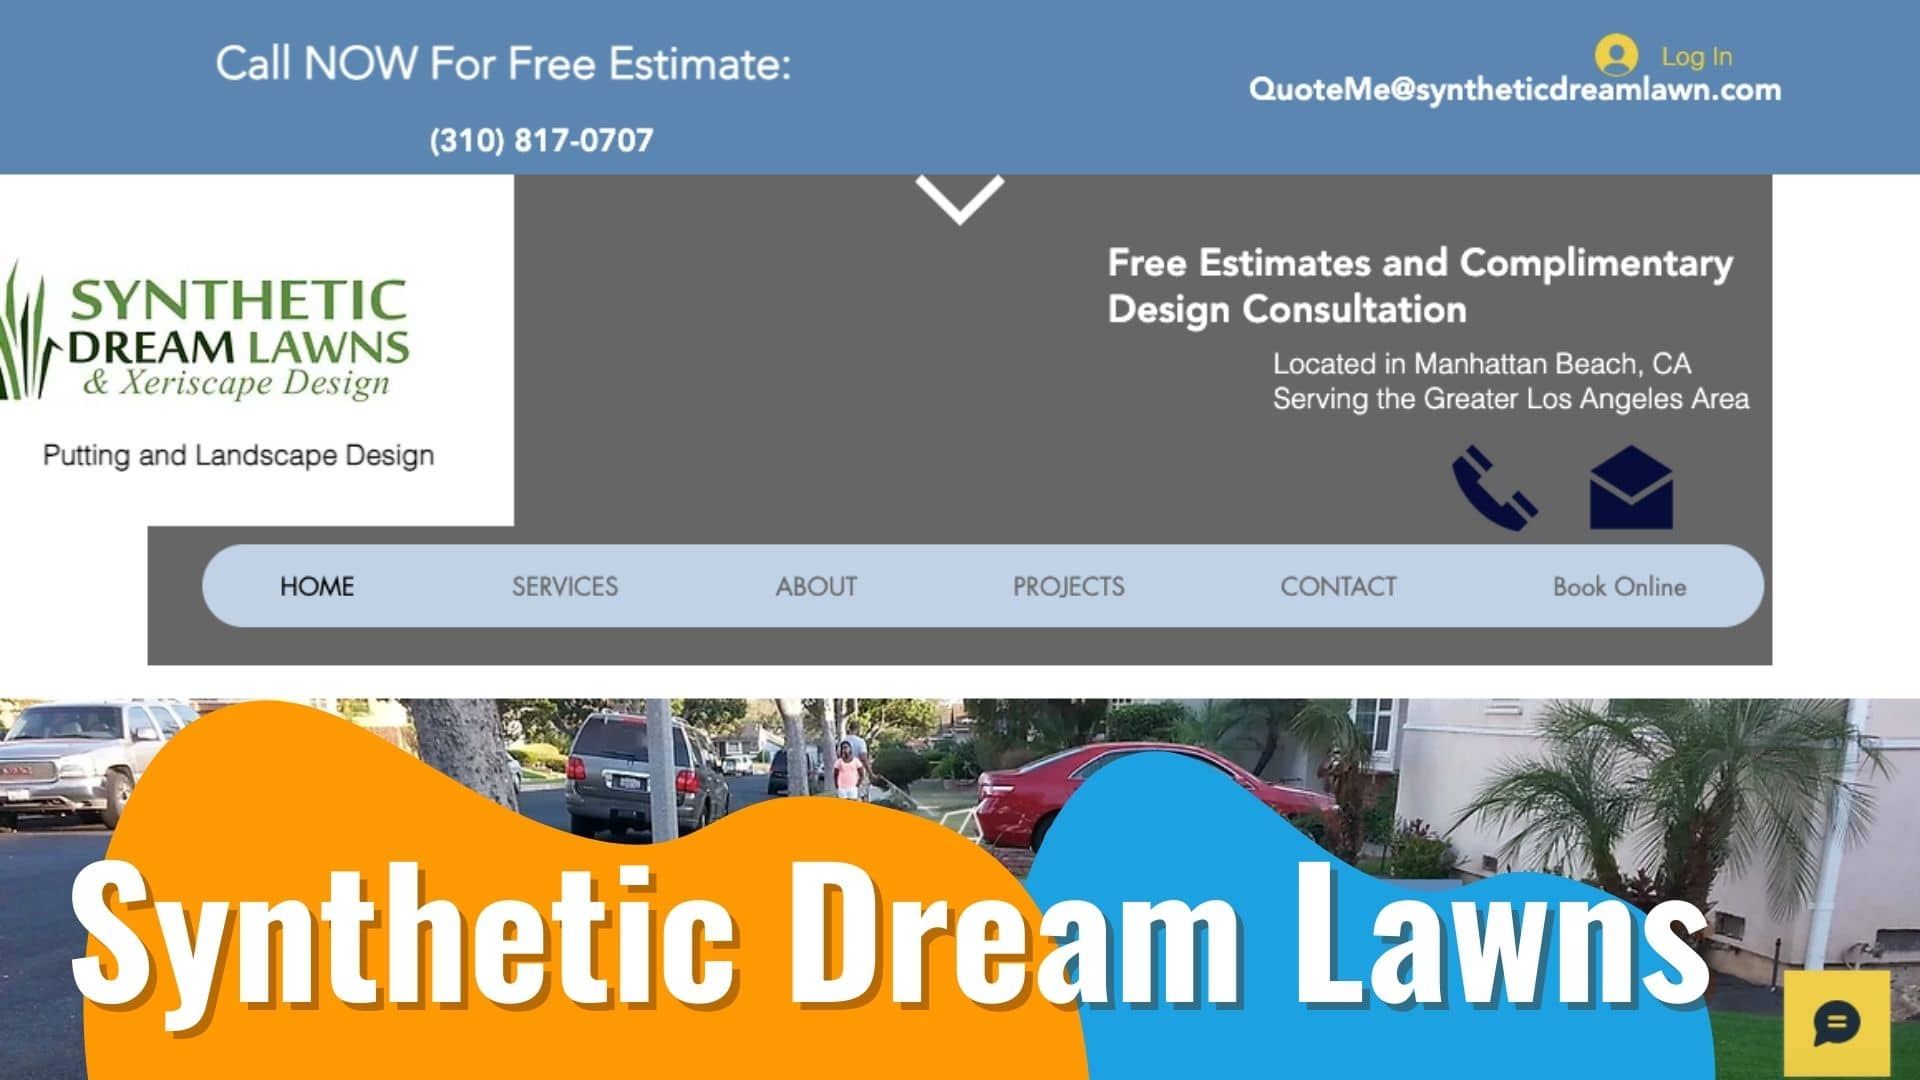 Synthetic Dream Lawns